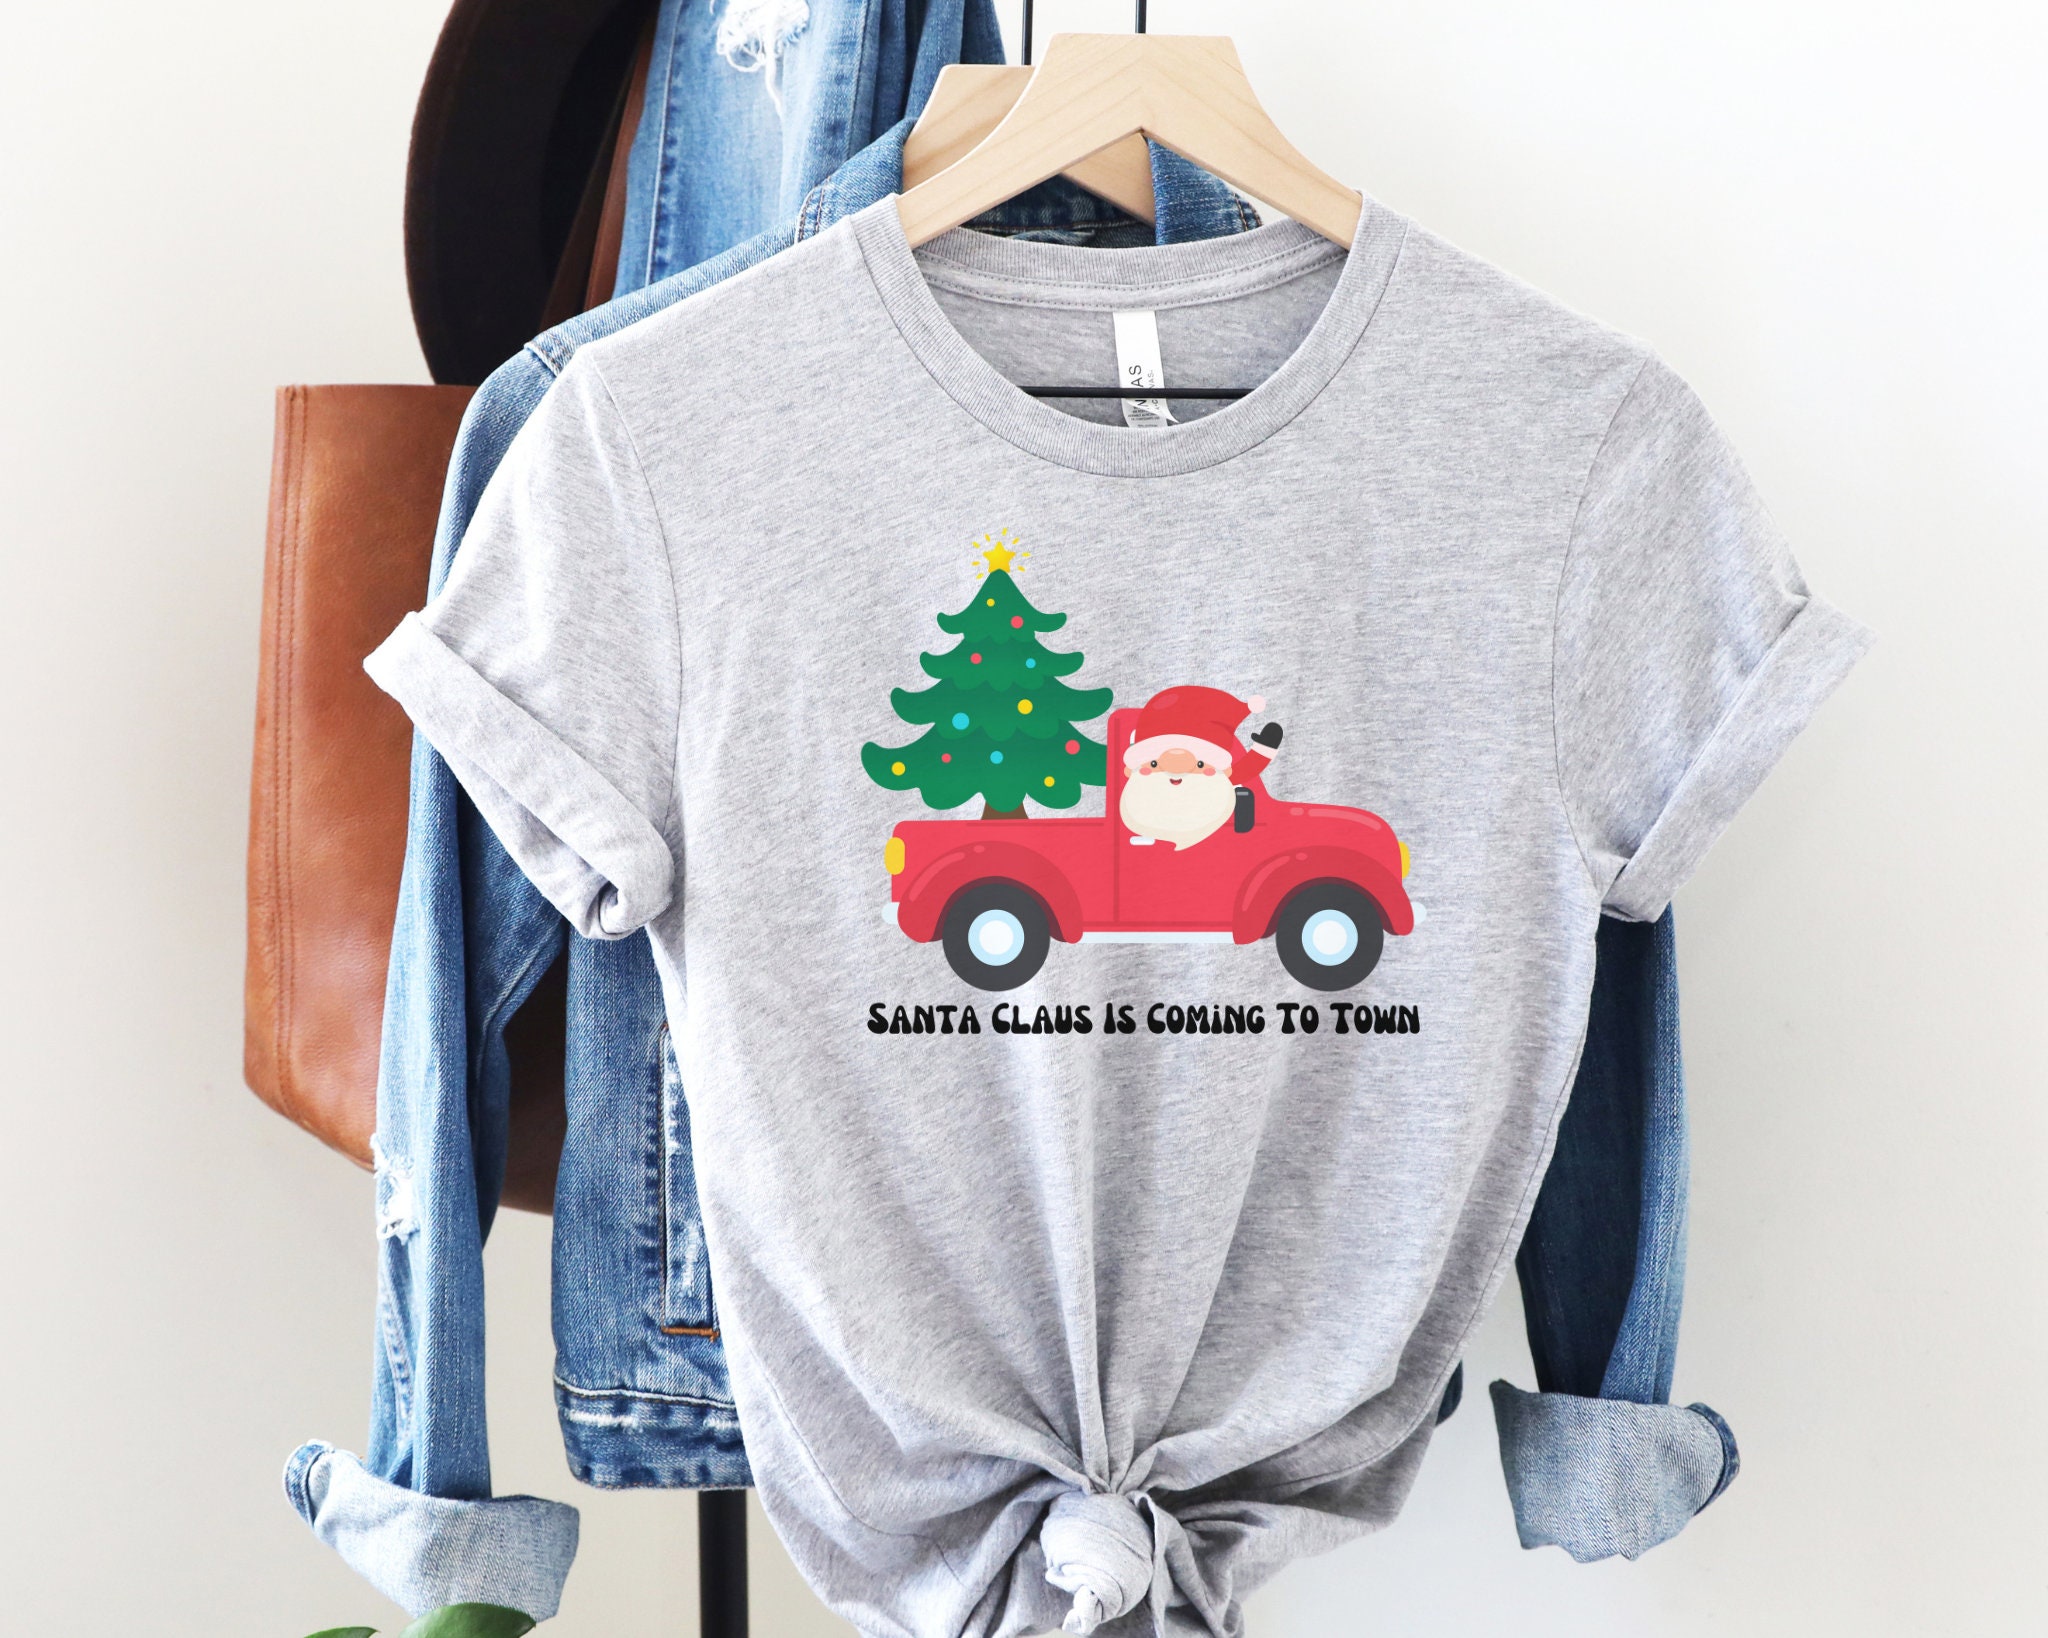 Discover Santa Claus Is Coming To Town Shirt, Santa Claus Is Coming, Secret Santa Shirt